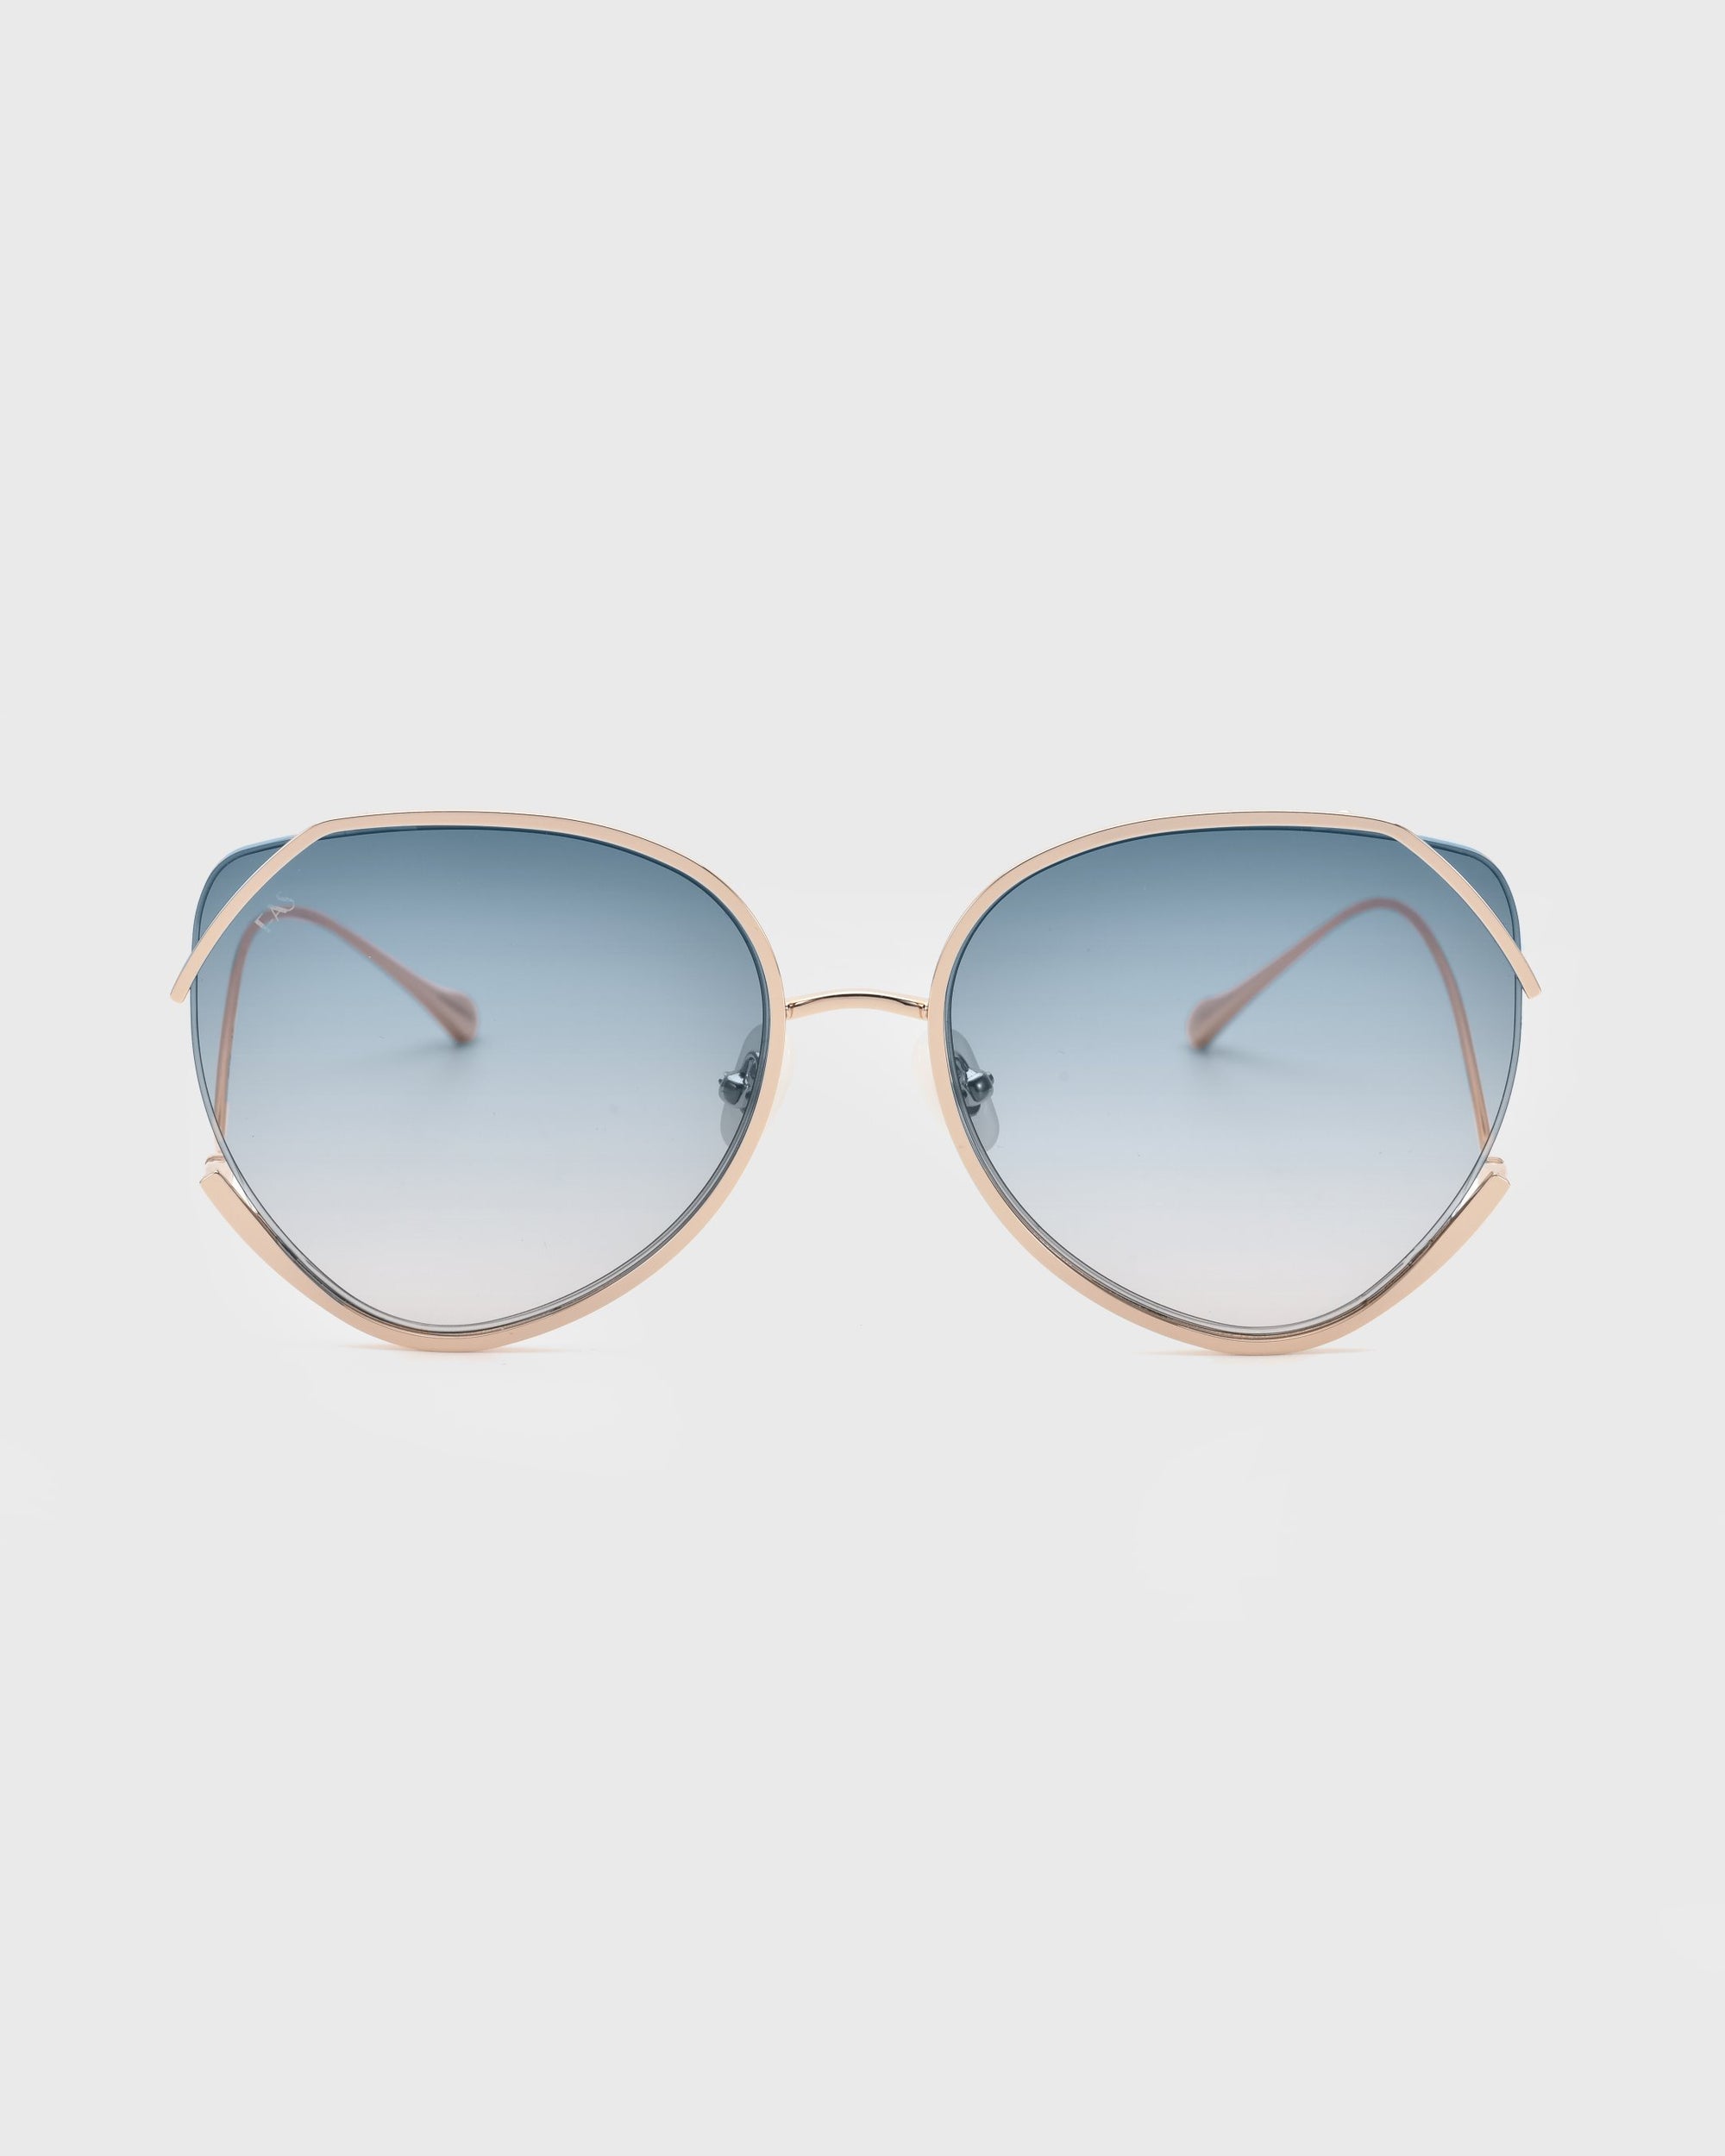 A pair of Wonderland sunglasses by For Art's Sake® with a thin, light-colored metal frame and large, teardrop-shaped blue gradient lenses. Equipped with jadestone nose pads for added comfort and UV protection, the arms of the glasses are also light-colored and slightly curved. The background is plain and white.